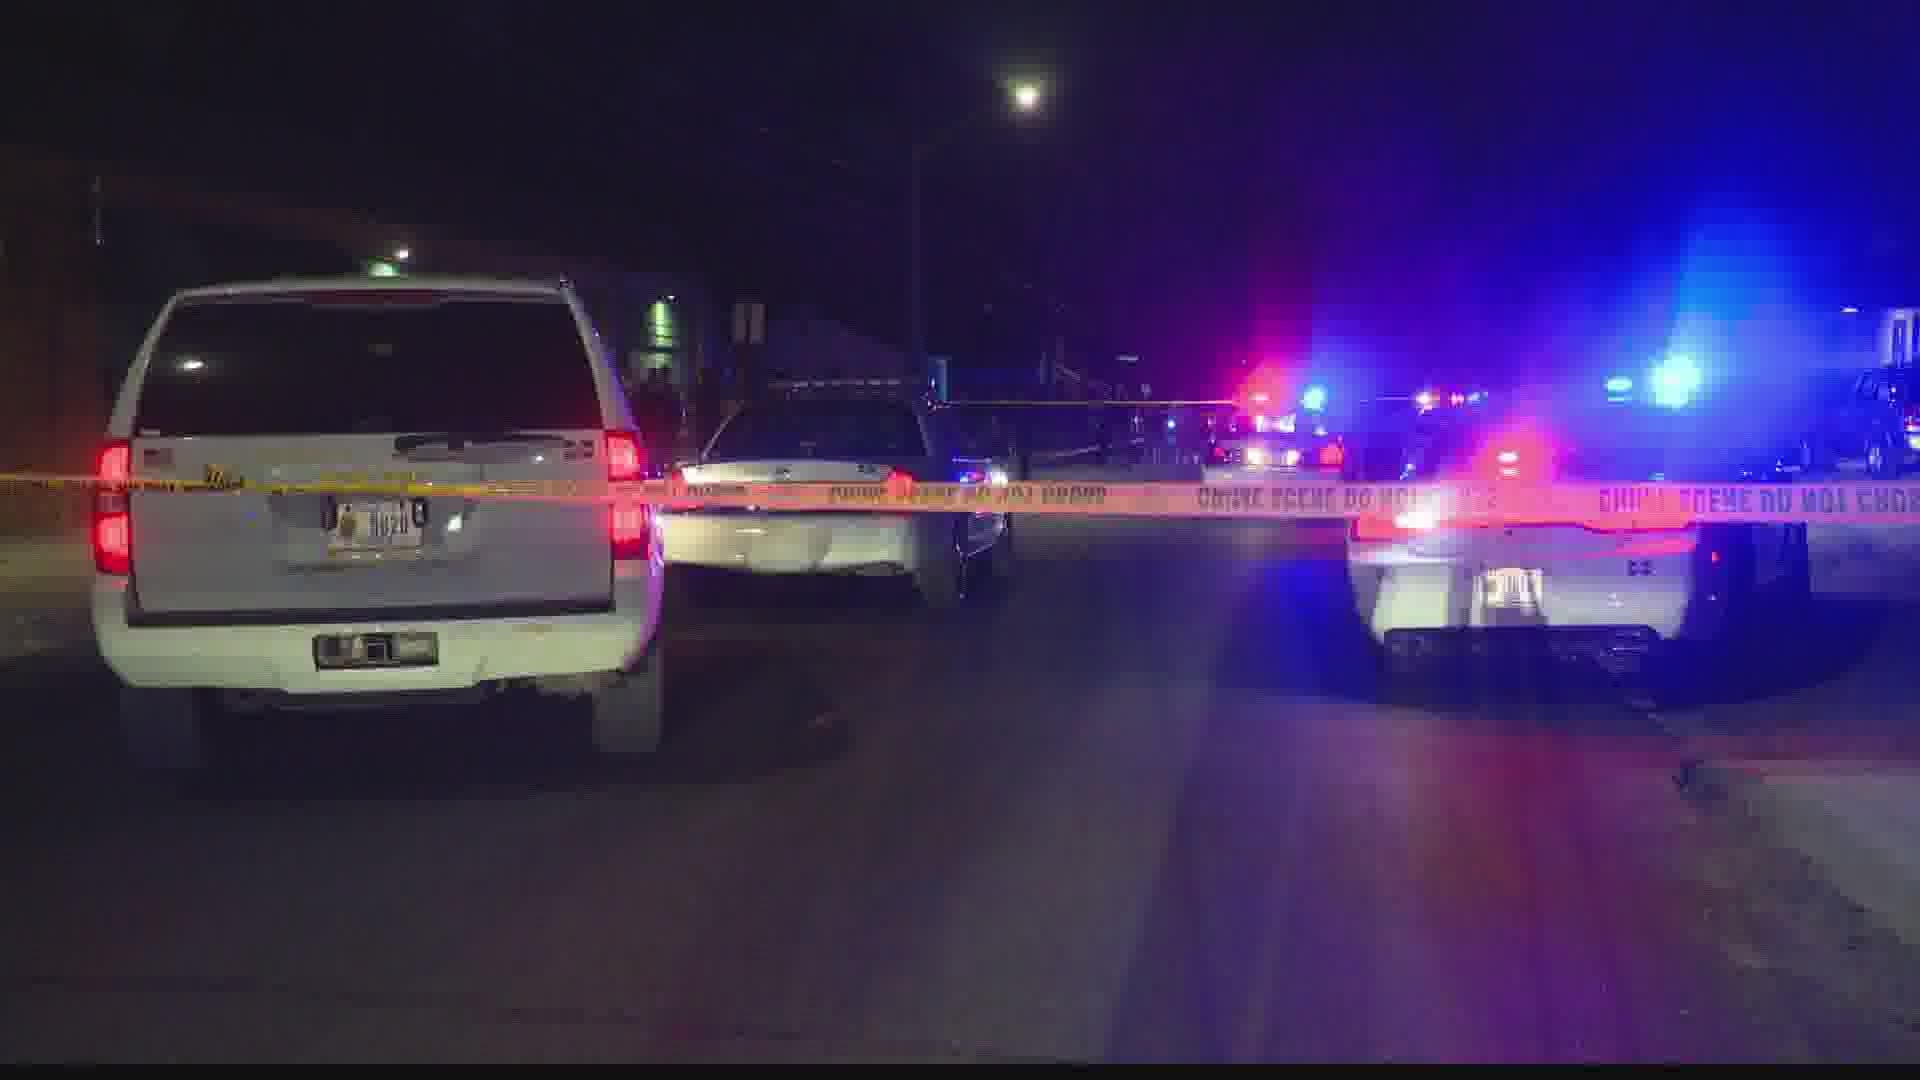 The woman was struck and killed by a vehicle in the 4000 block of E. 30th Street just before midnight Wednesday.